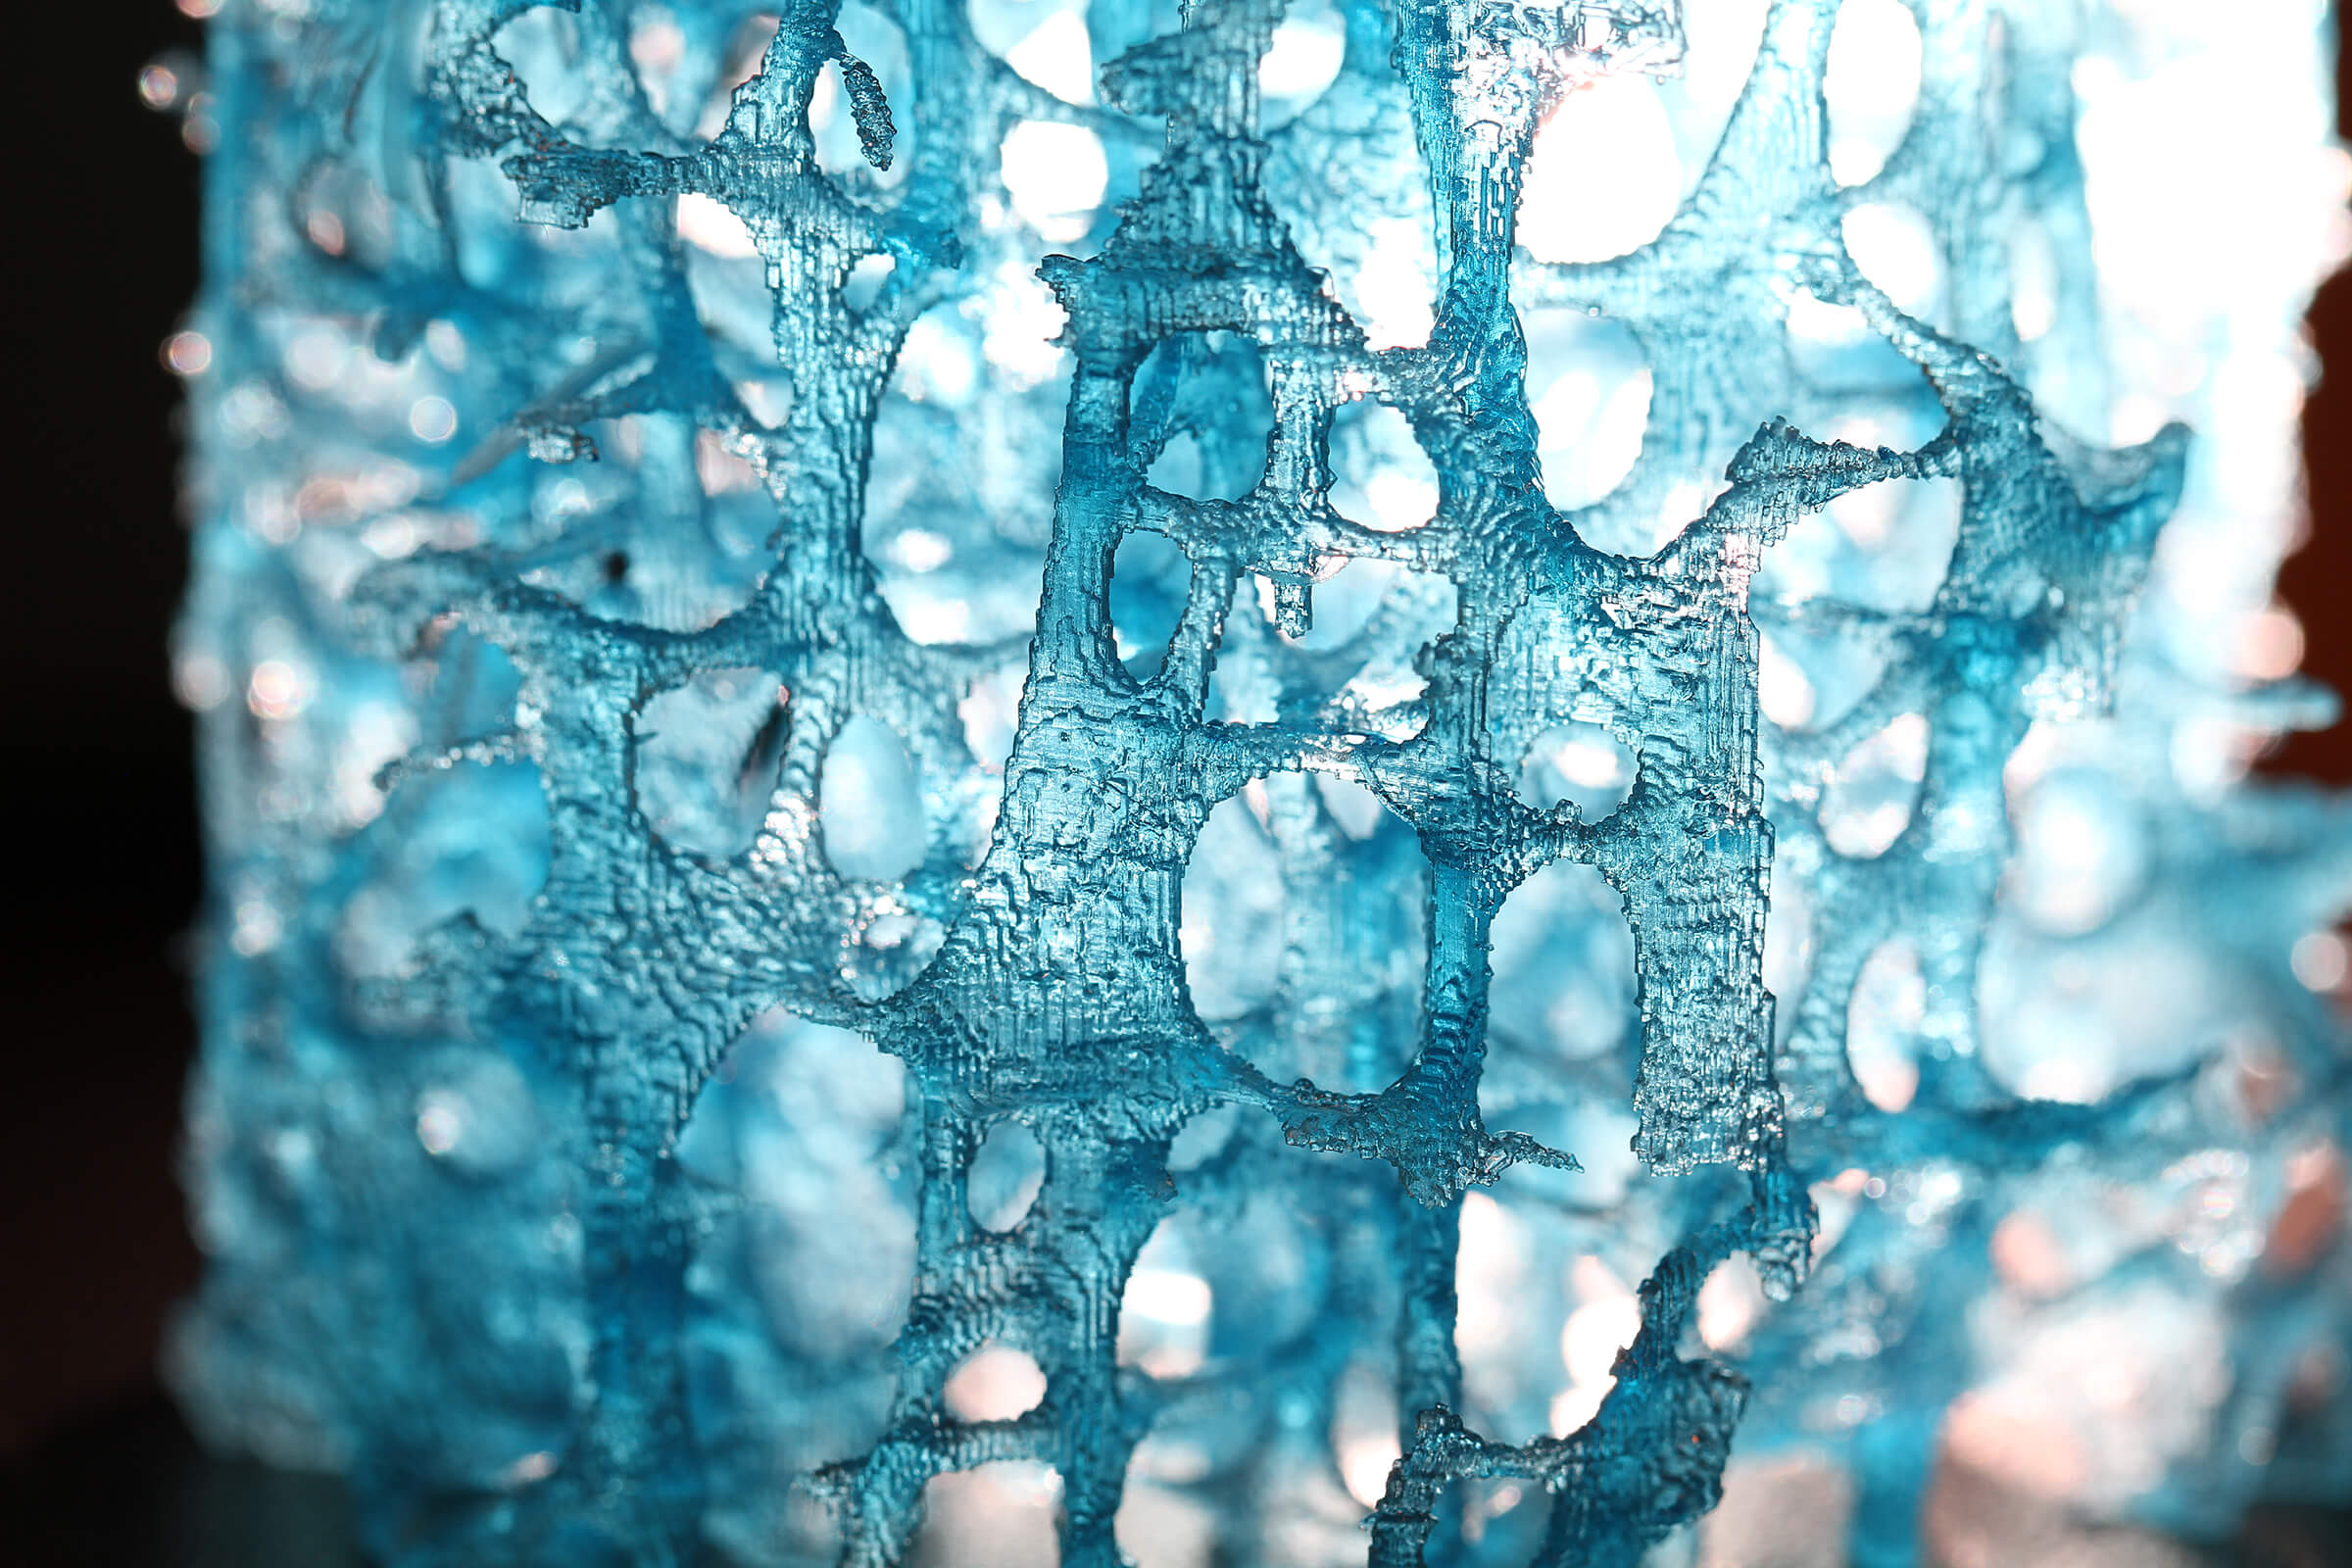 The 3D-printed model of bone's structure is bright blue and has light shining through its porous structure